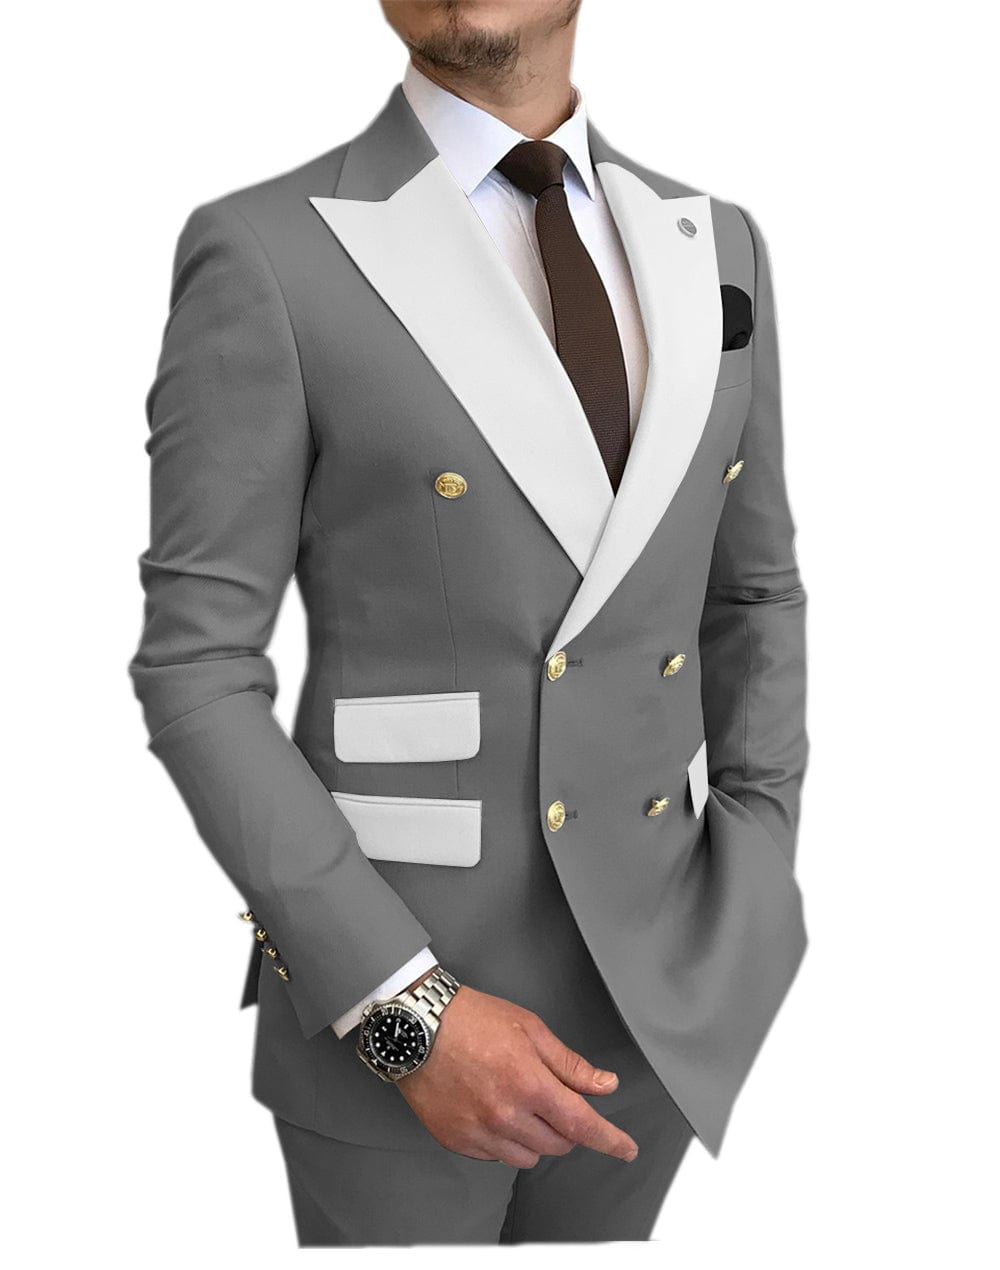 ceehuteey Men's Suit Casual  Double Breasted 2 Piece Business Wedding (Blazer+Pants)